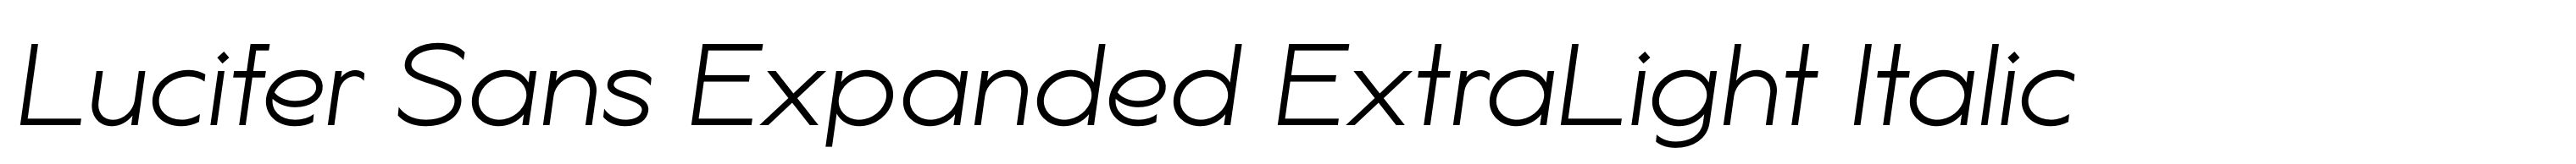 Lucifer Sans Expanded ExtraLight Italic